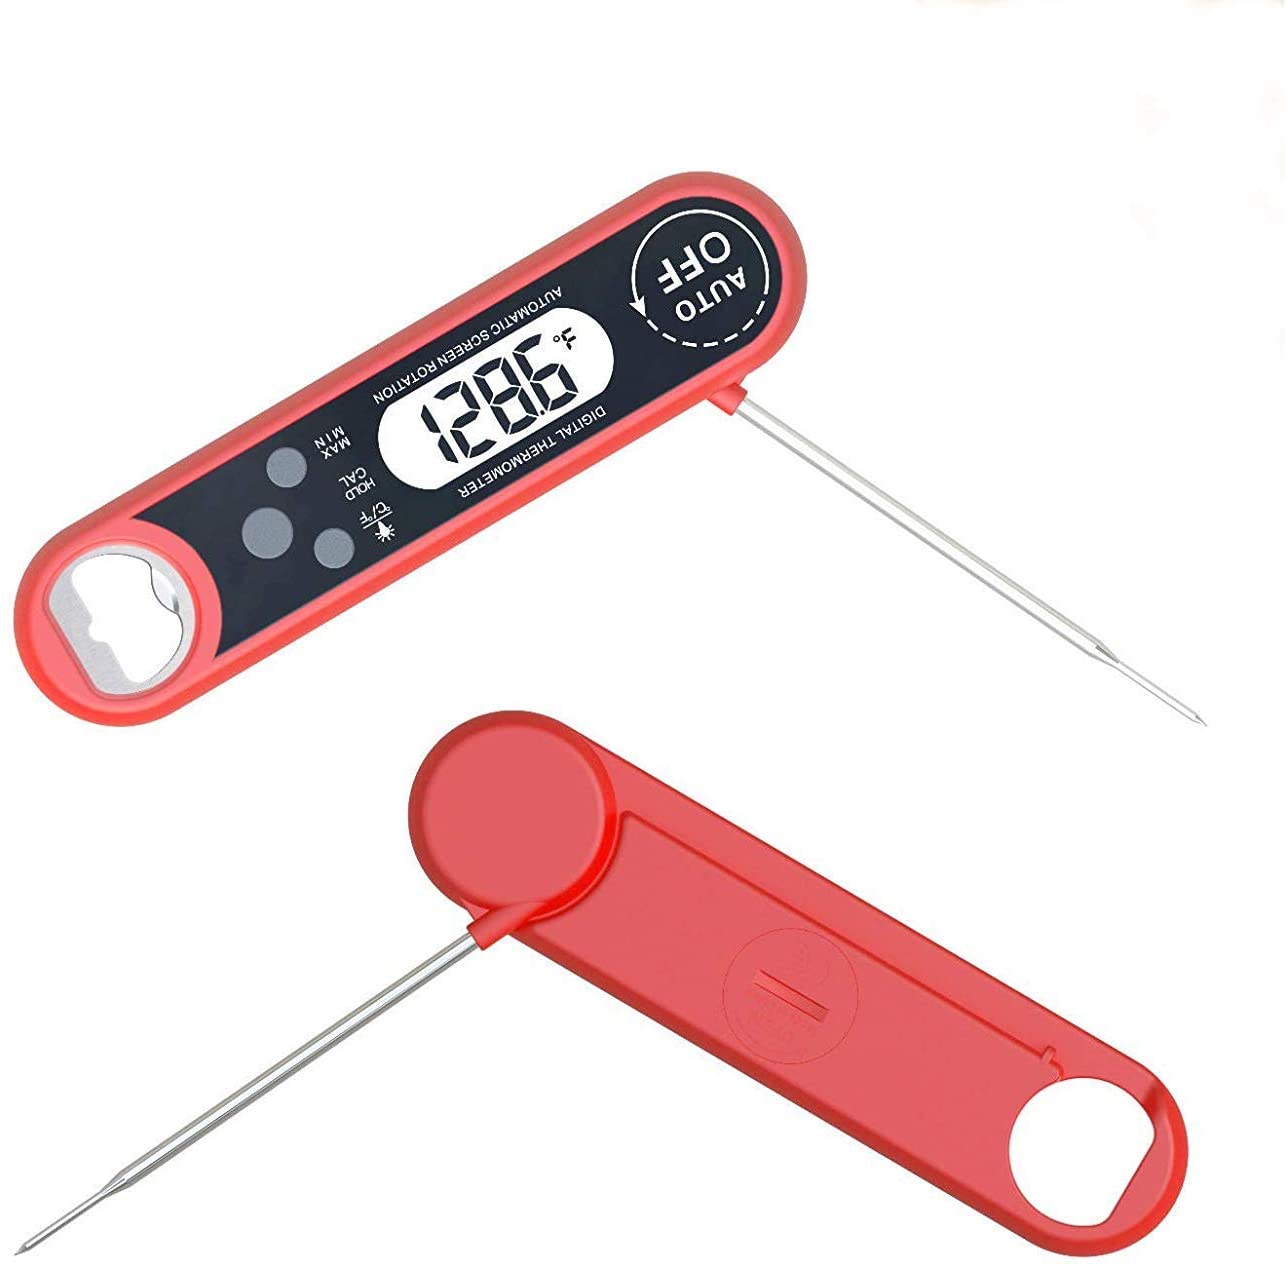 Waterproof Digital Kitchen Food Thermometer Built-in Folding Probe, LCD Backlight, Calibration Function, Bottle Opener for BBQ Oven Smoker Turkey Candy 